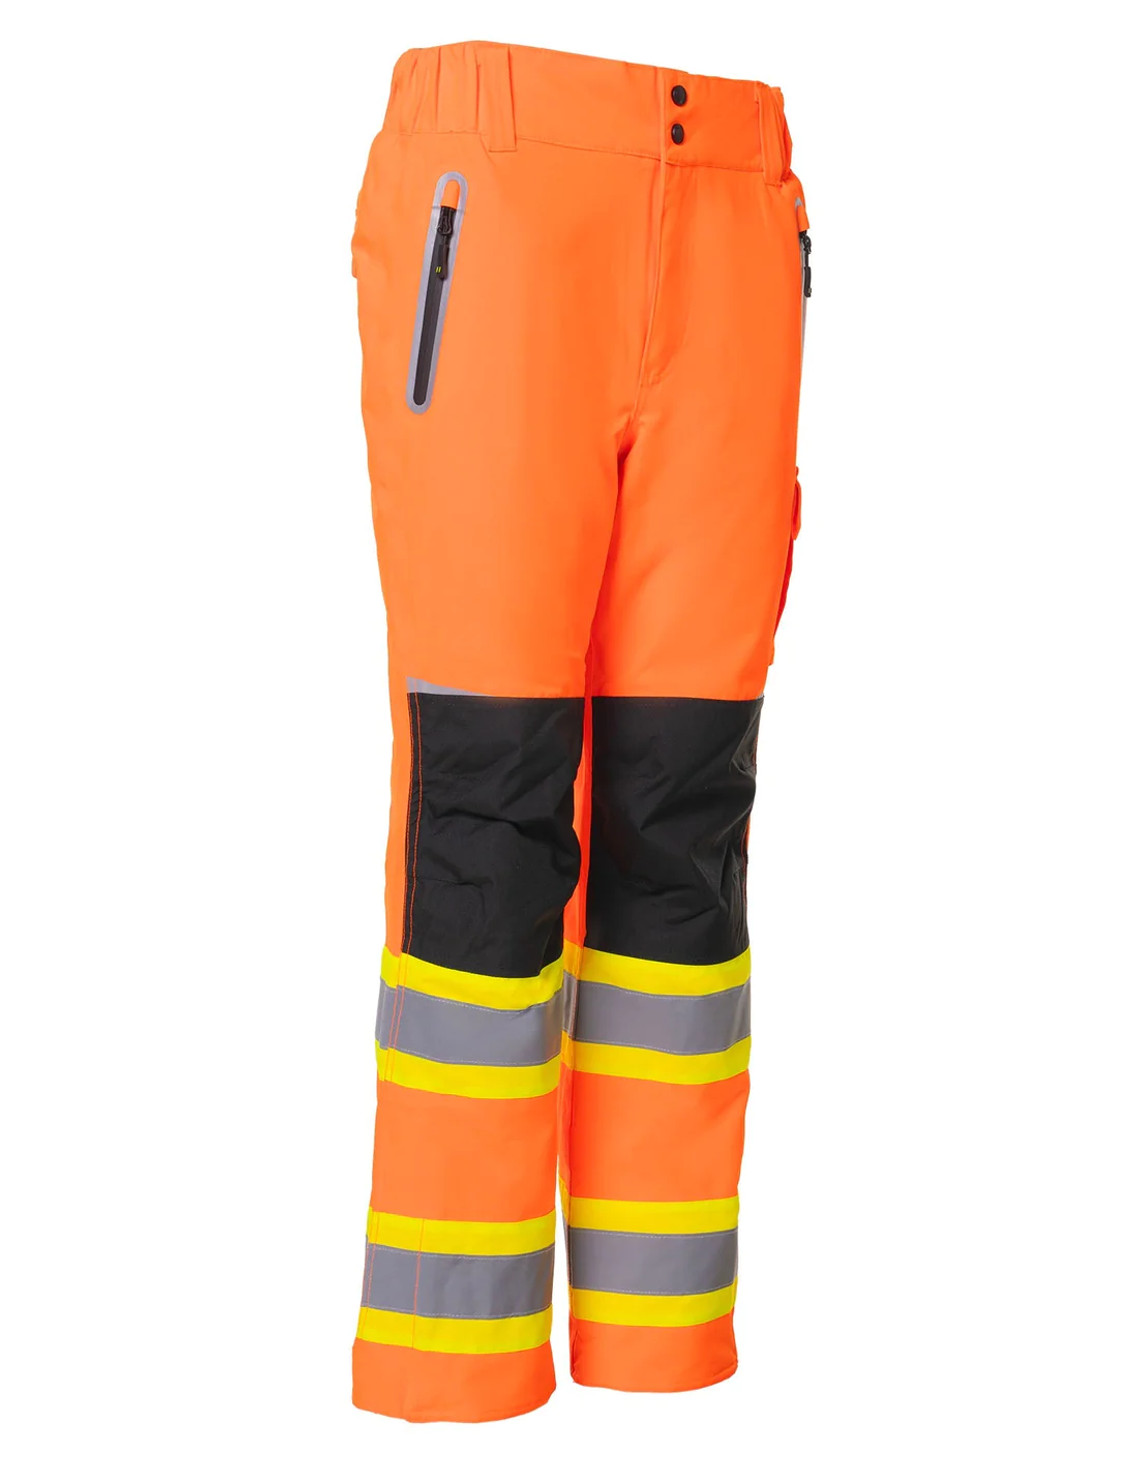 ForceField Women's Hi-Vis Safety Lined Utility Pants | SafetyApparel.ca